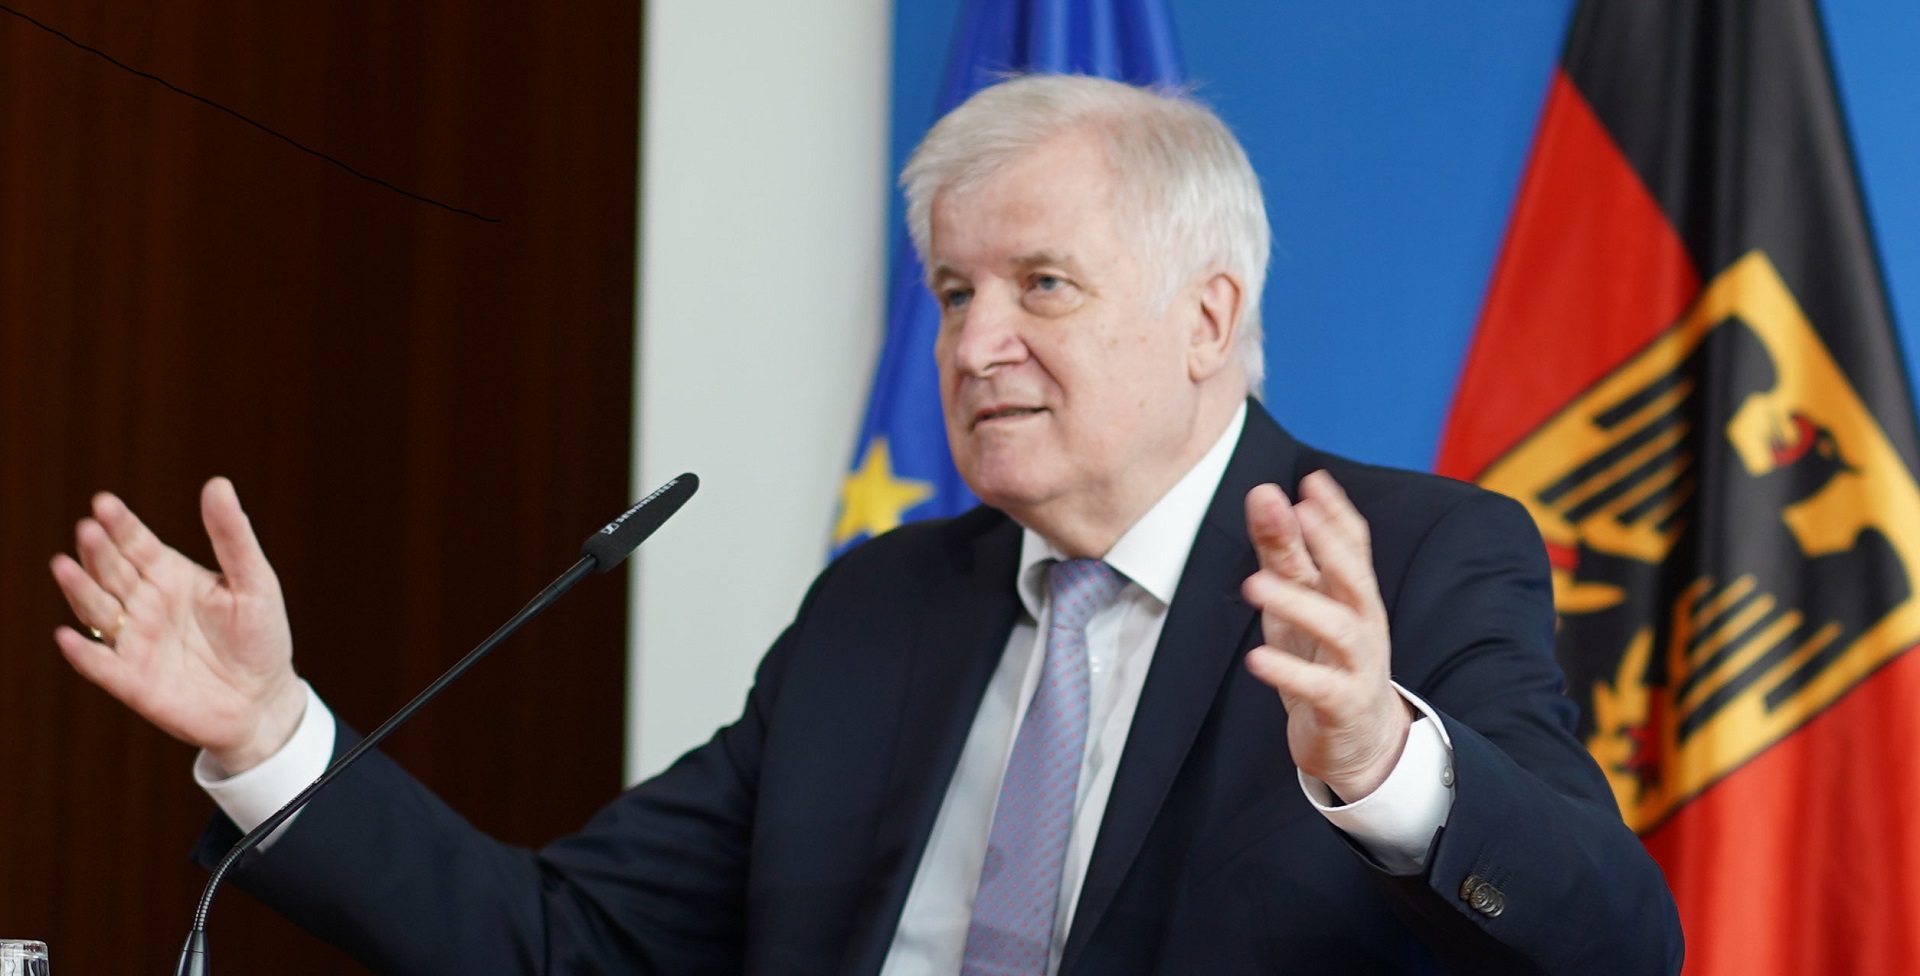 10 June 2020, Berlin: Germany's Interior Minister Horst Seehofer arrives for a press conference about the planned phasing out of internal border controls. Photo: Jörg Carstensen/dpa